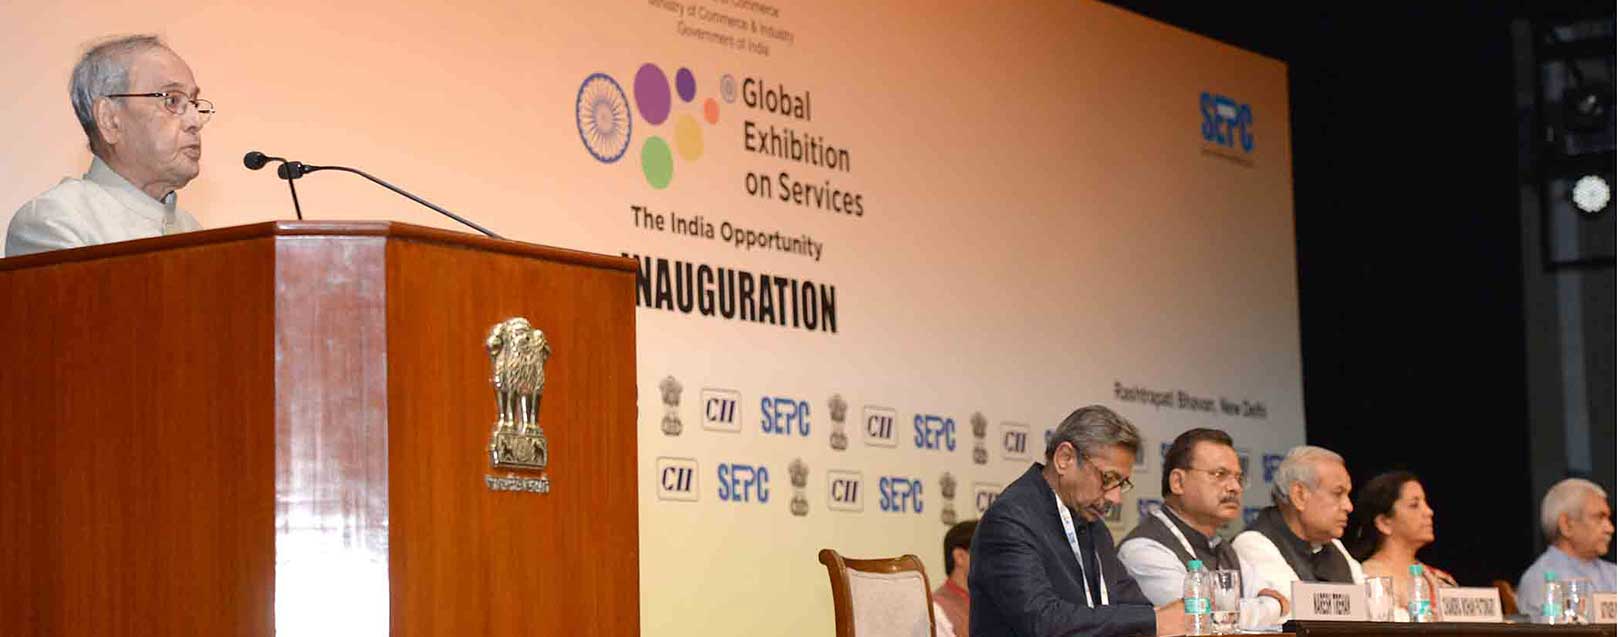 Global services trade is far less than merchandise trade: President